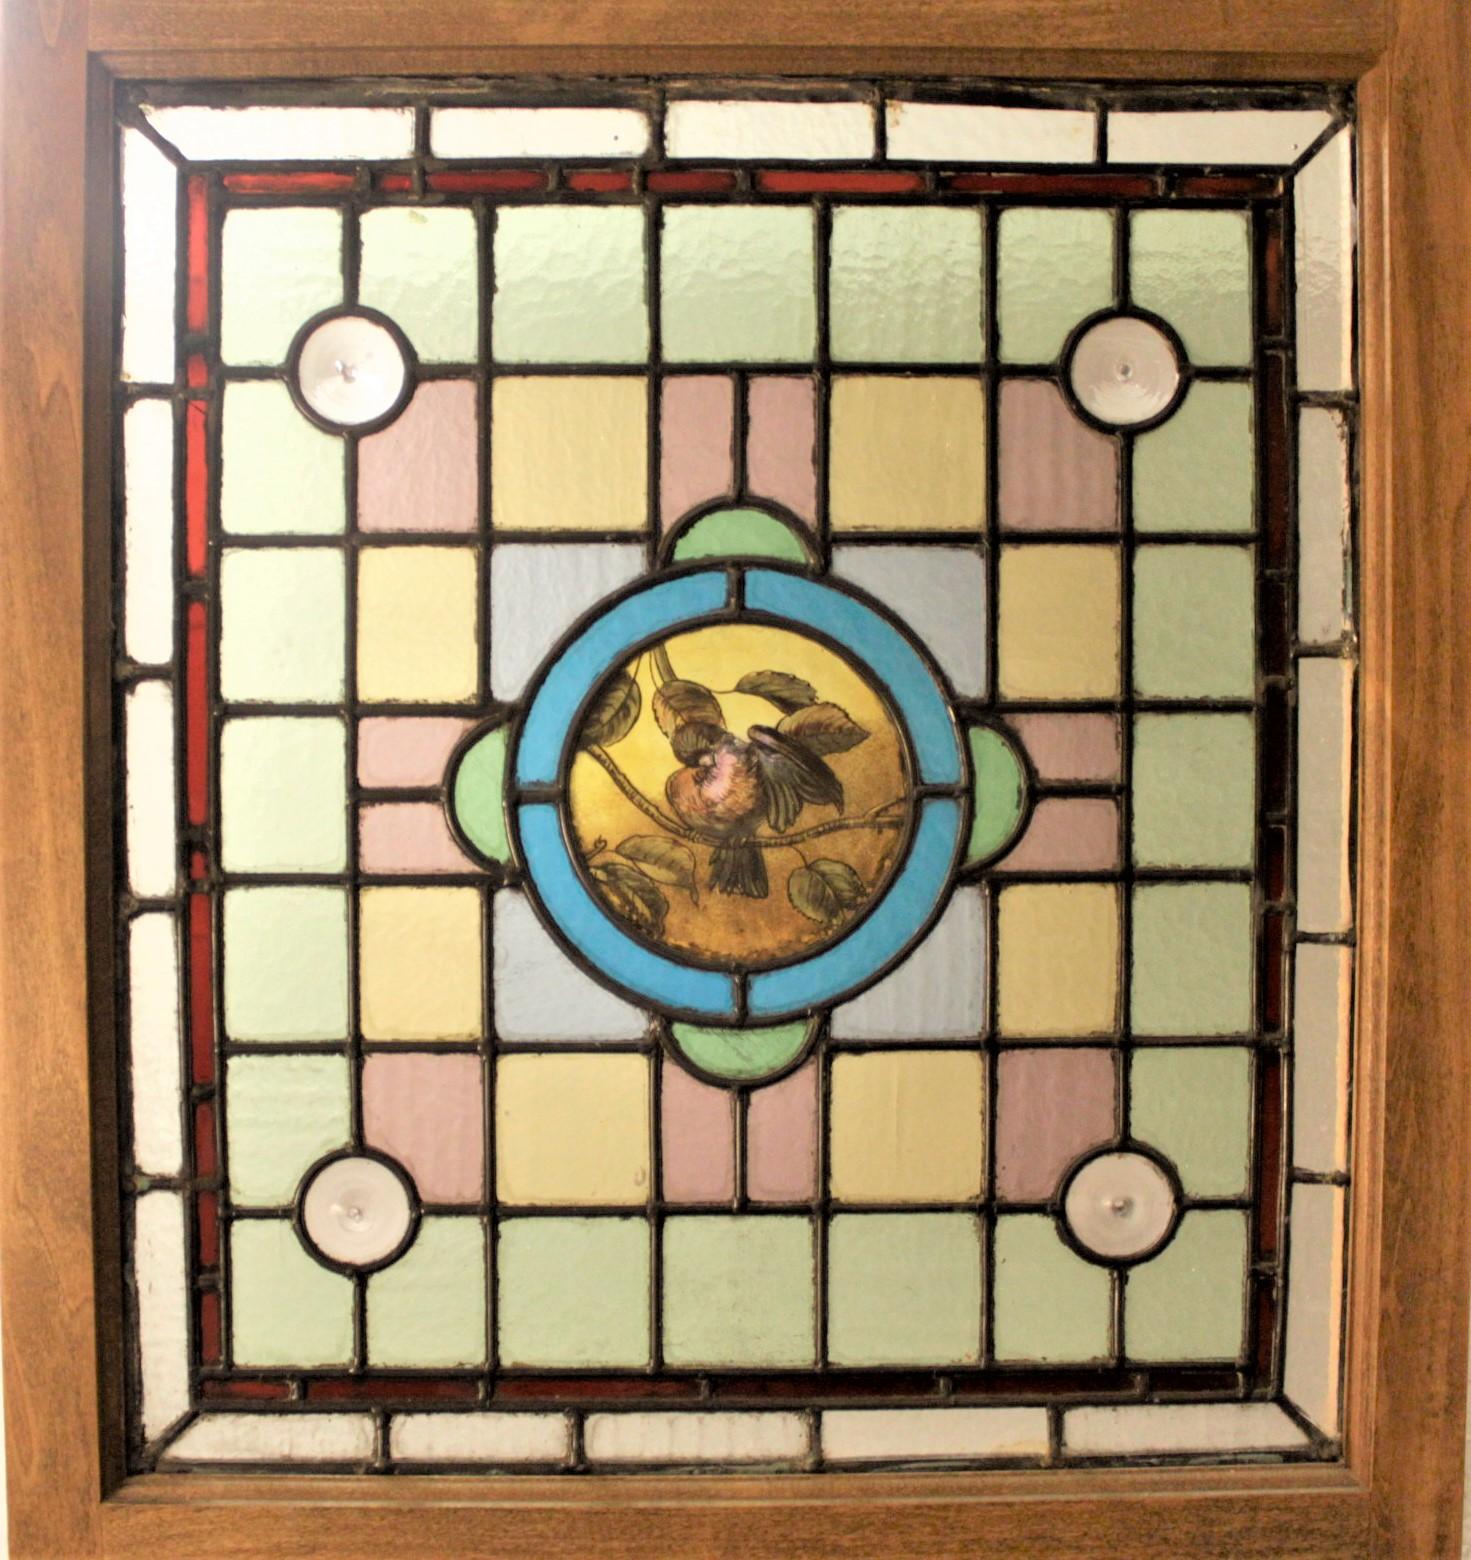 This very elaborate antique stained glass window was likely made in the United States in circa 1880 in the period Victorian style. This stained glass panel features a hand painted bird in the central circular medallion. The window is done in muted